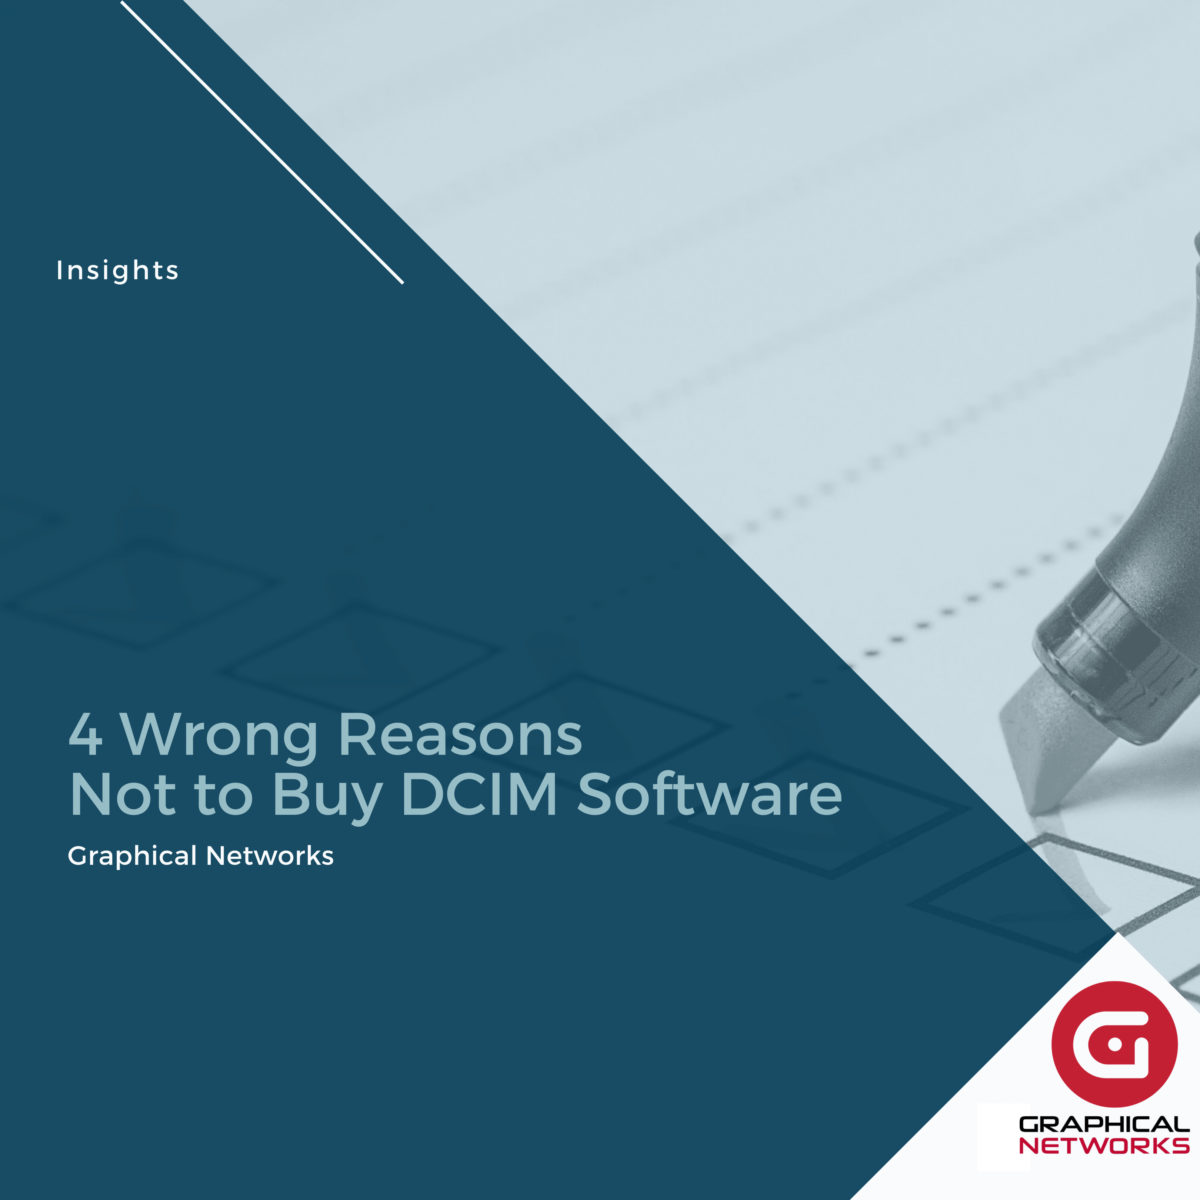 4 Wrong Reasons Not to Buy DCIM Software